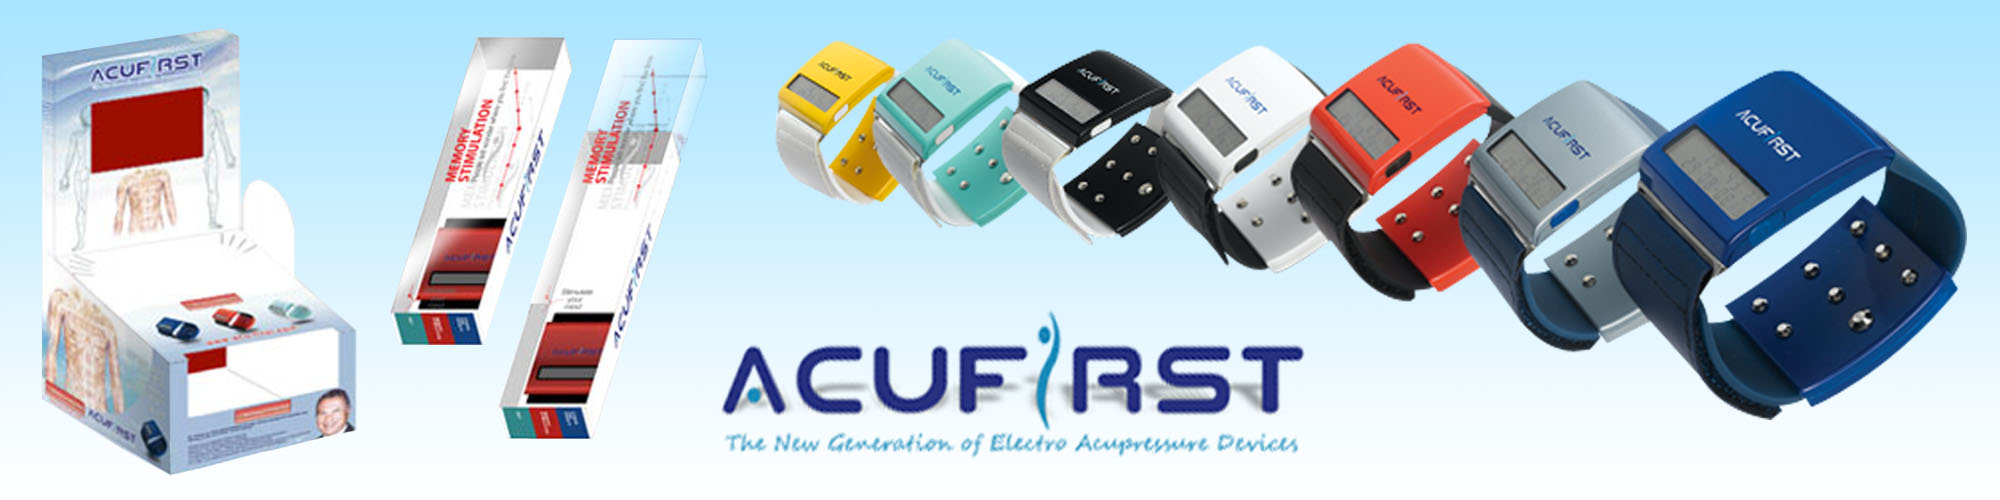 Acufirst